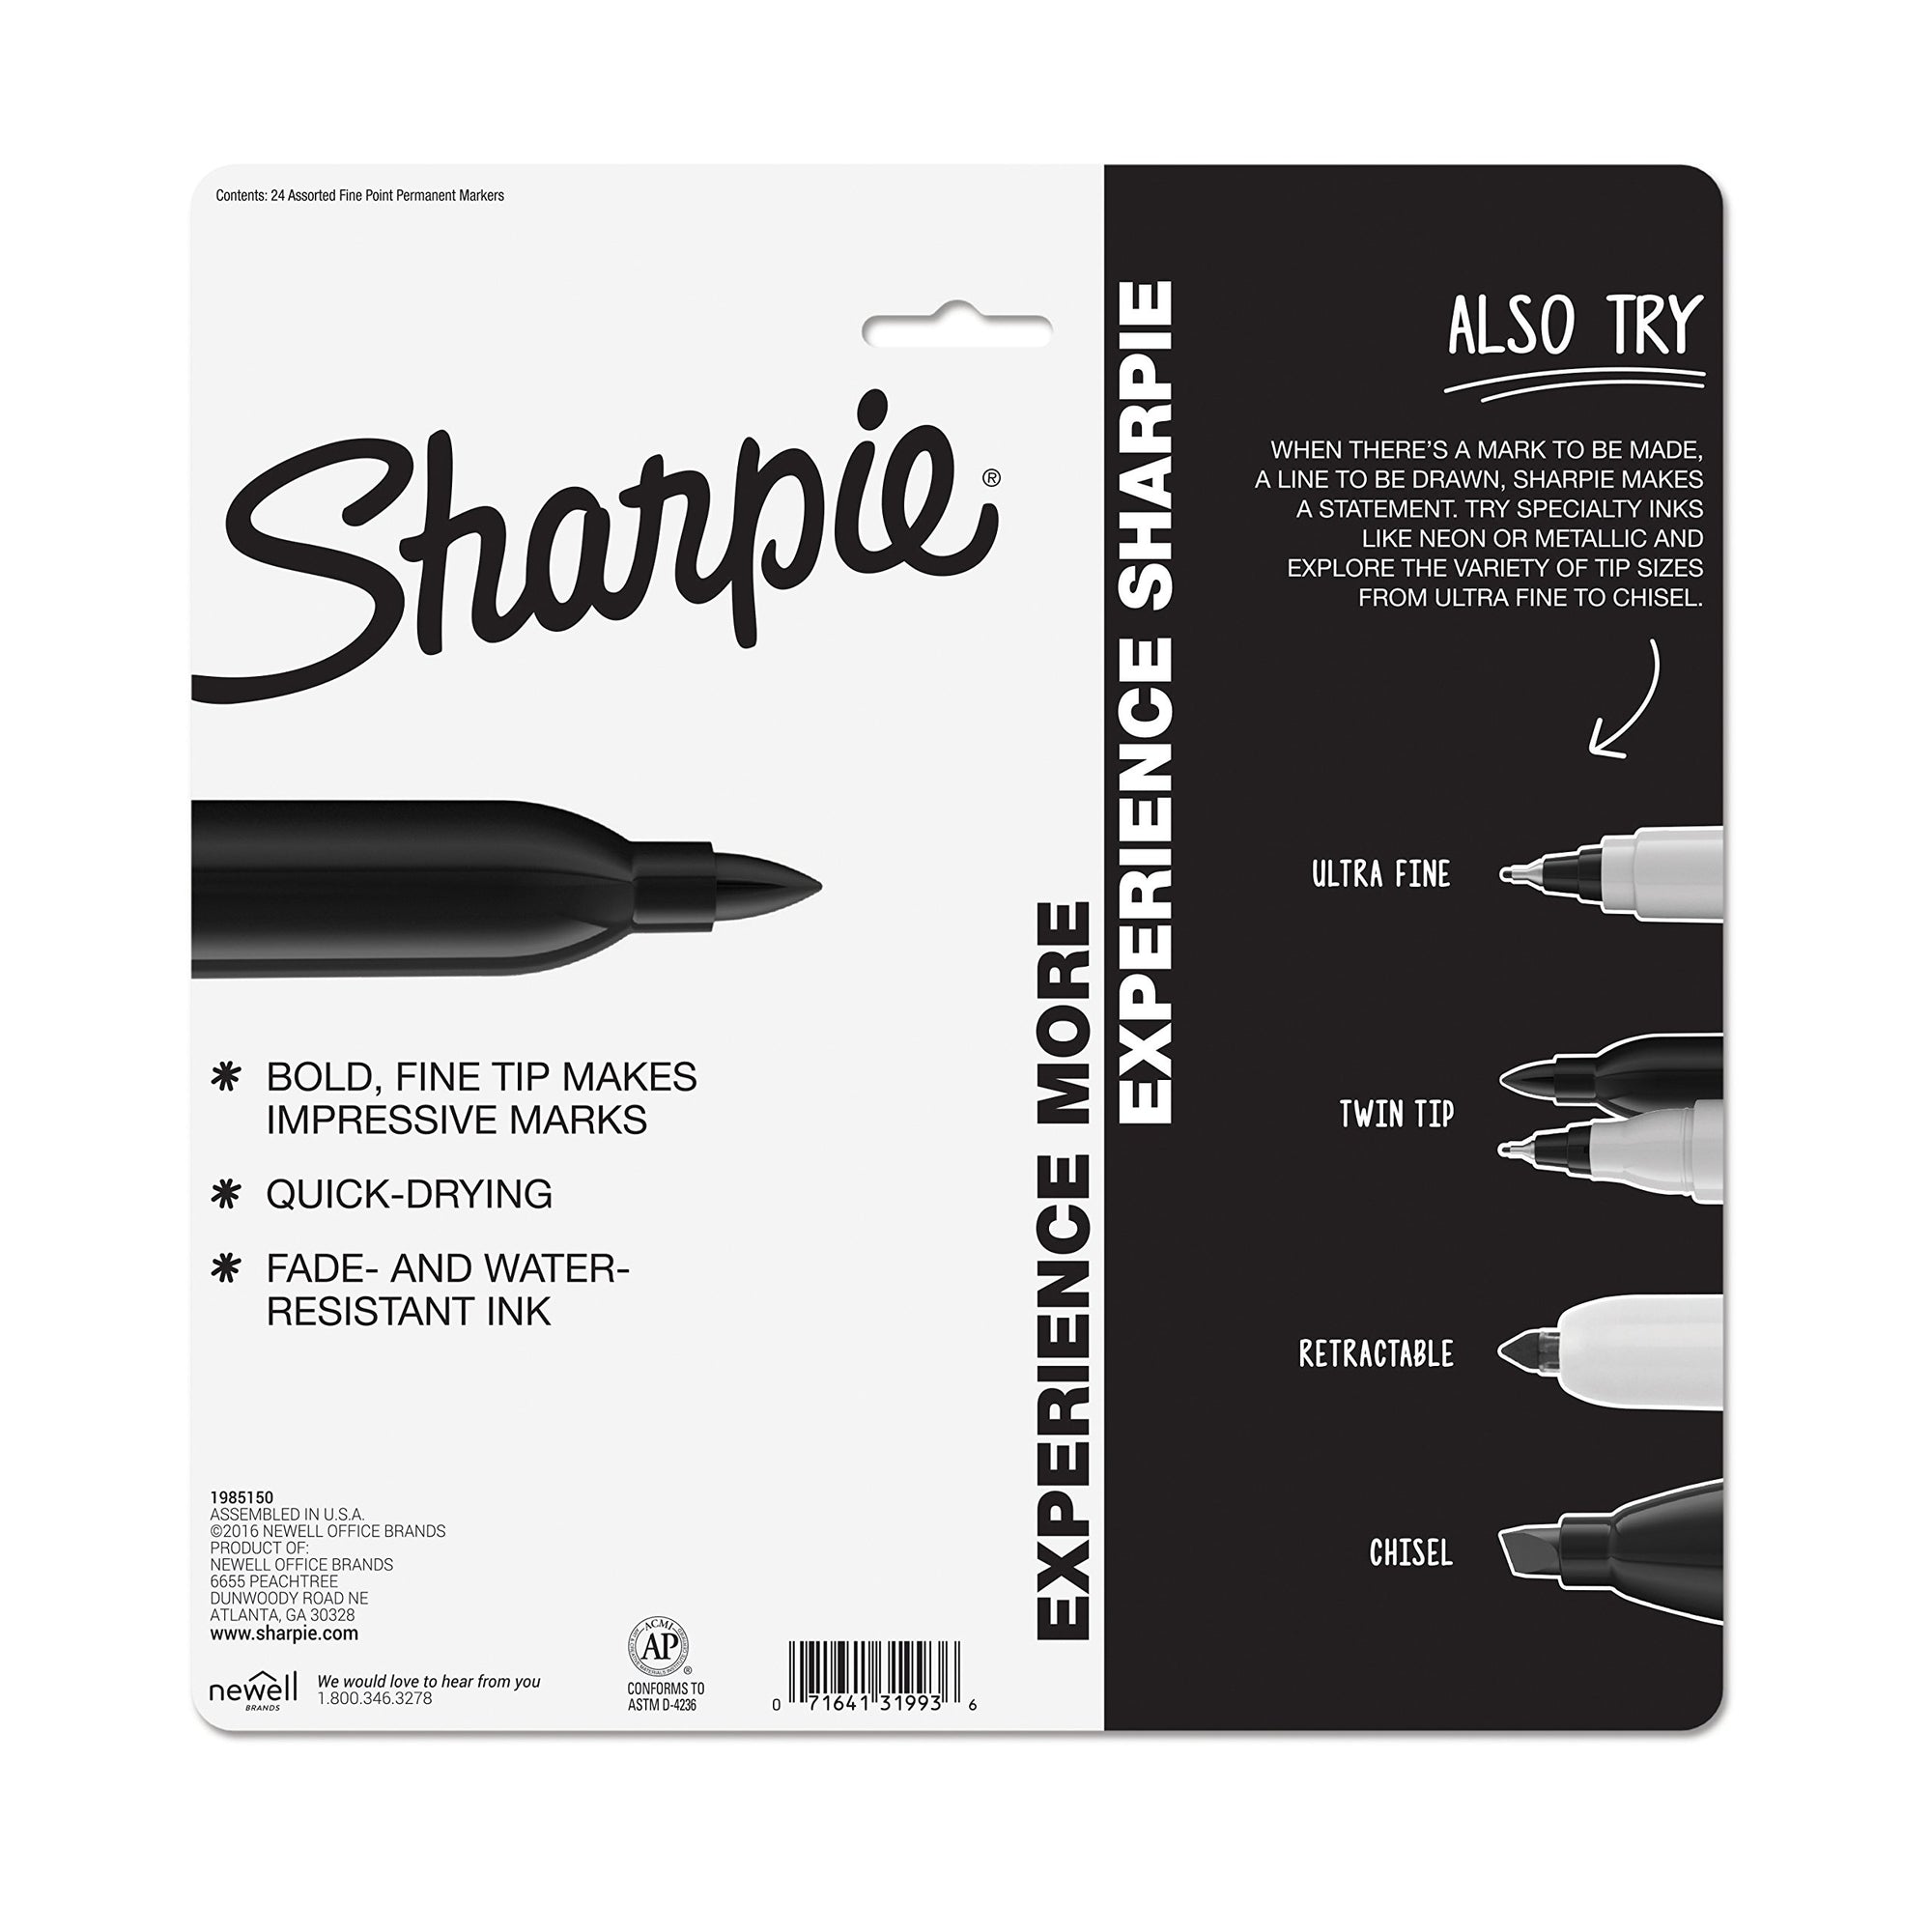  SHARPIE Permanent Markers, Ultra Fine Point, Assorted Colors,  24 Count : Office Products